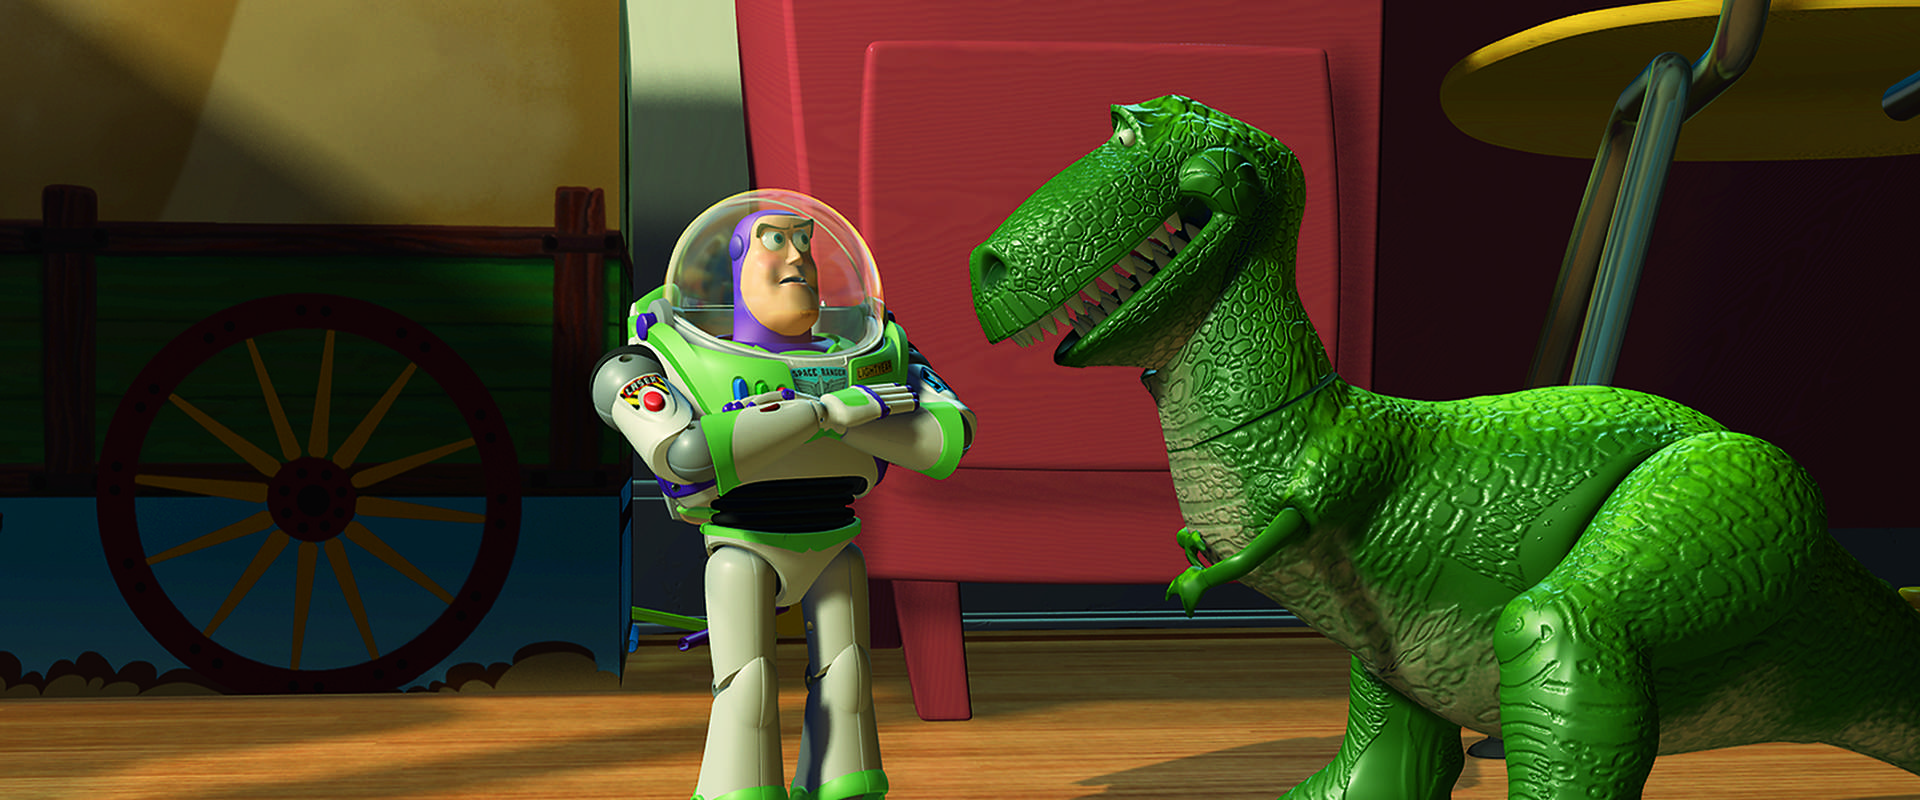 Toy Story background 2